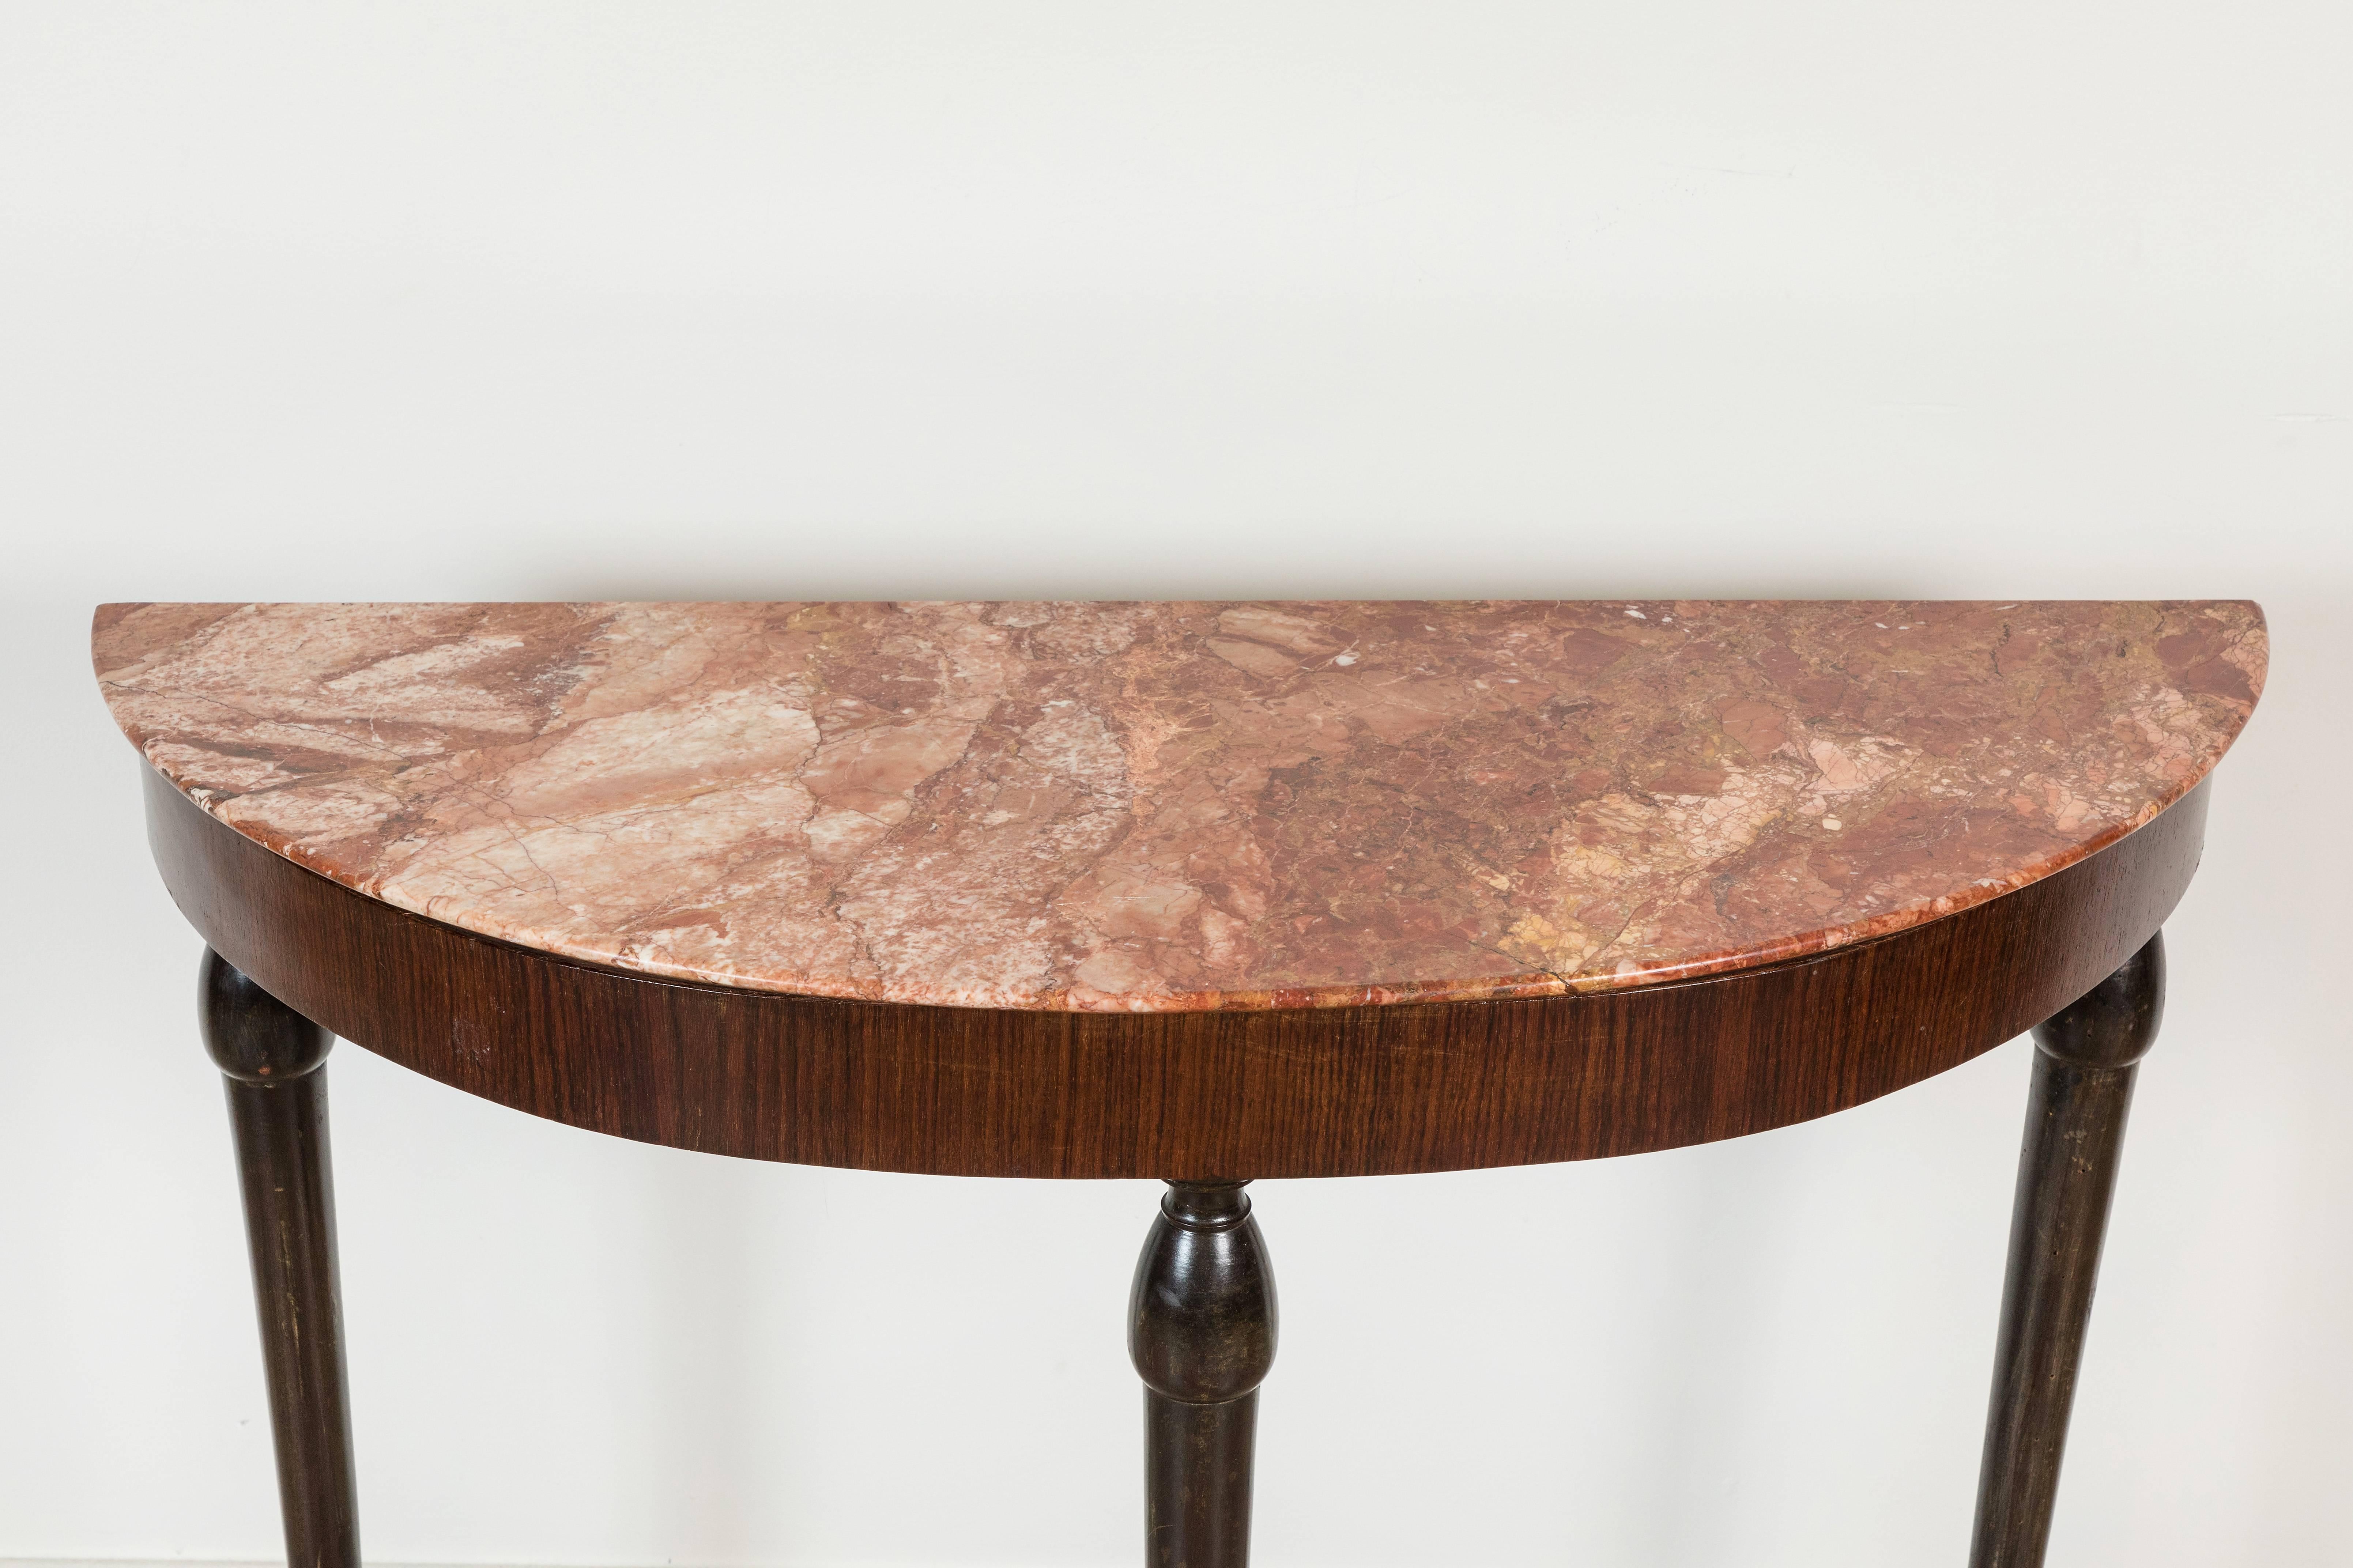 Italian marble topped demilune console.